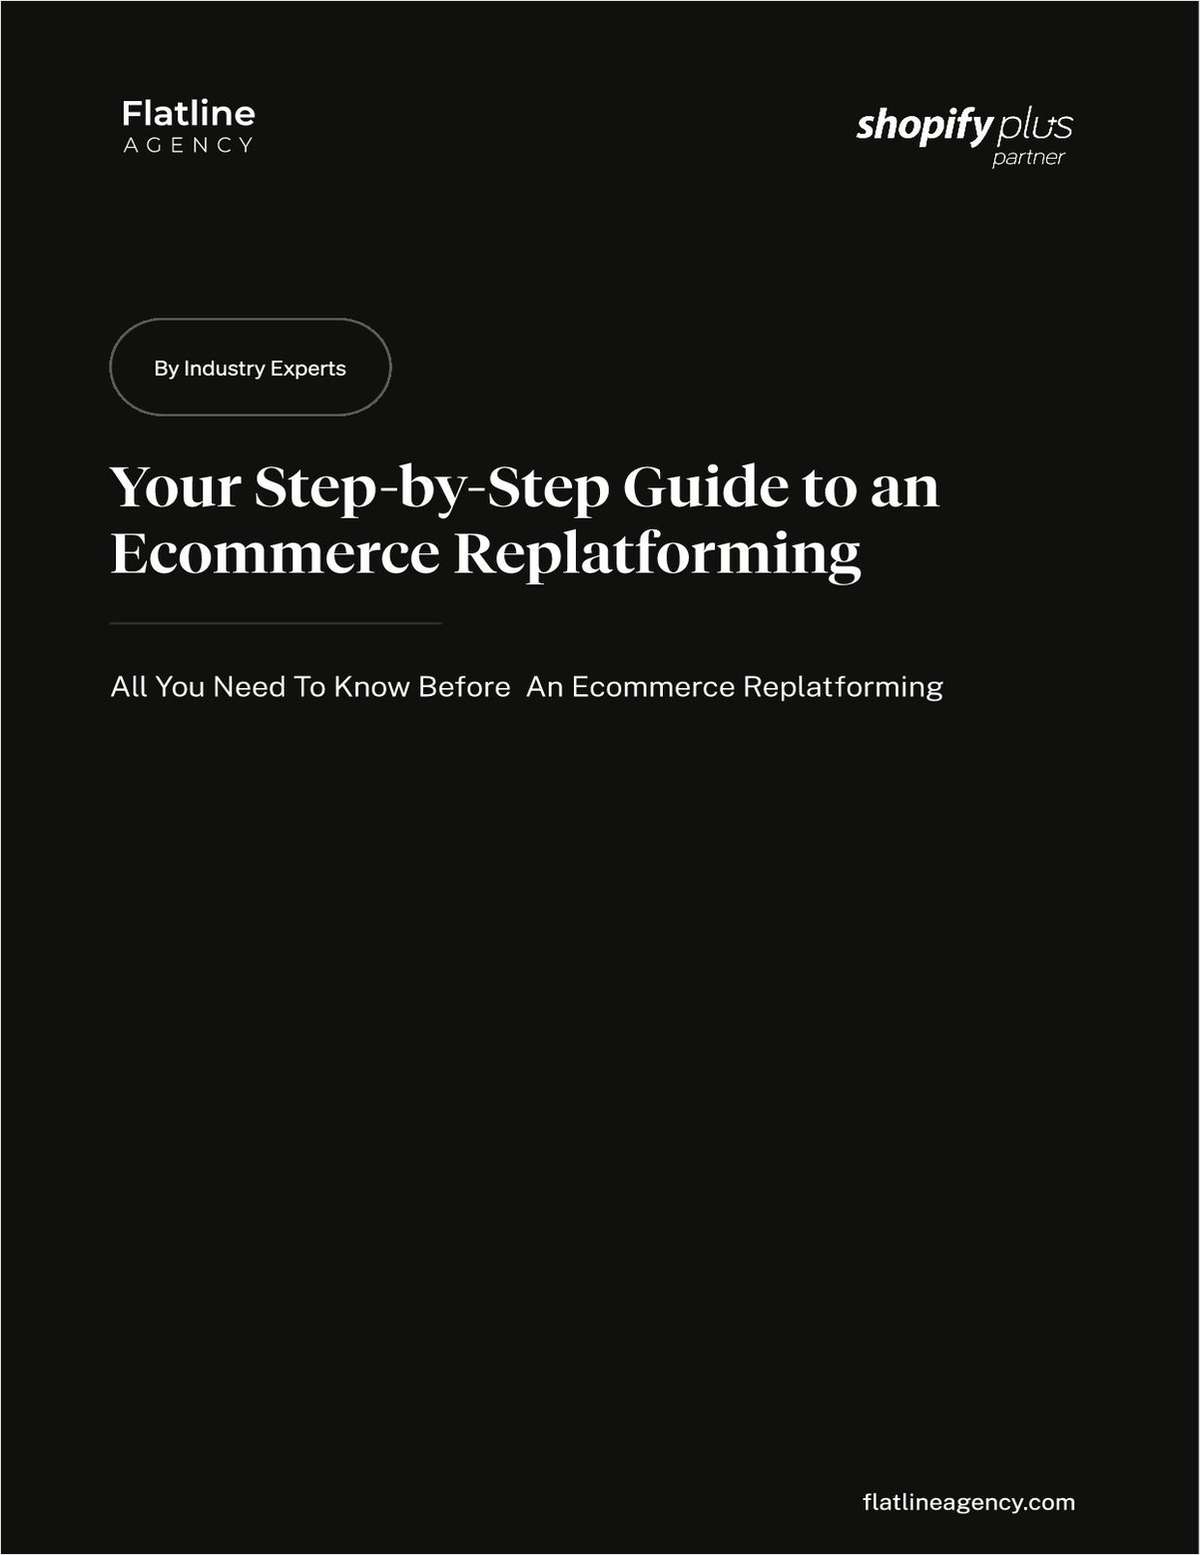 Step-by-Step Guide to a Successful Ecommerce Replatforming